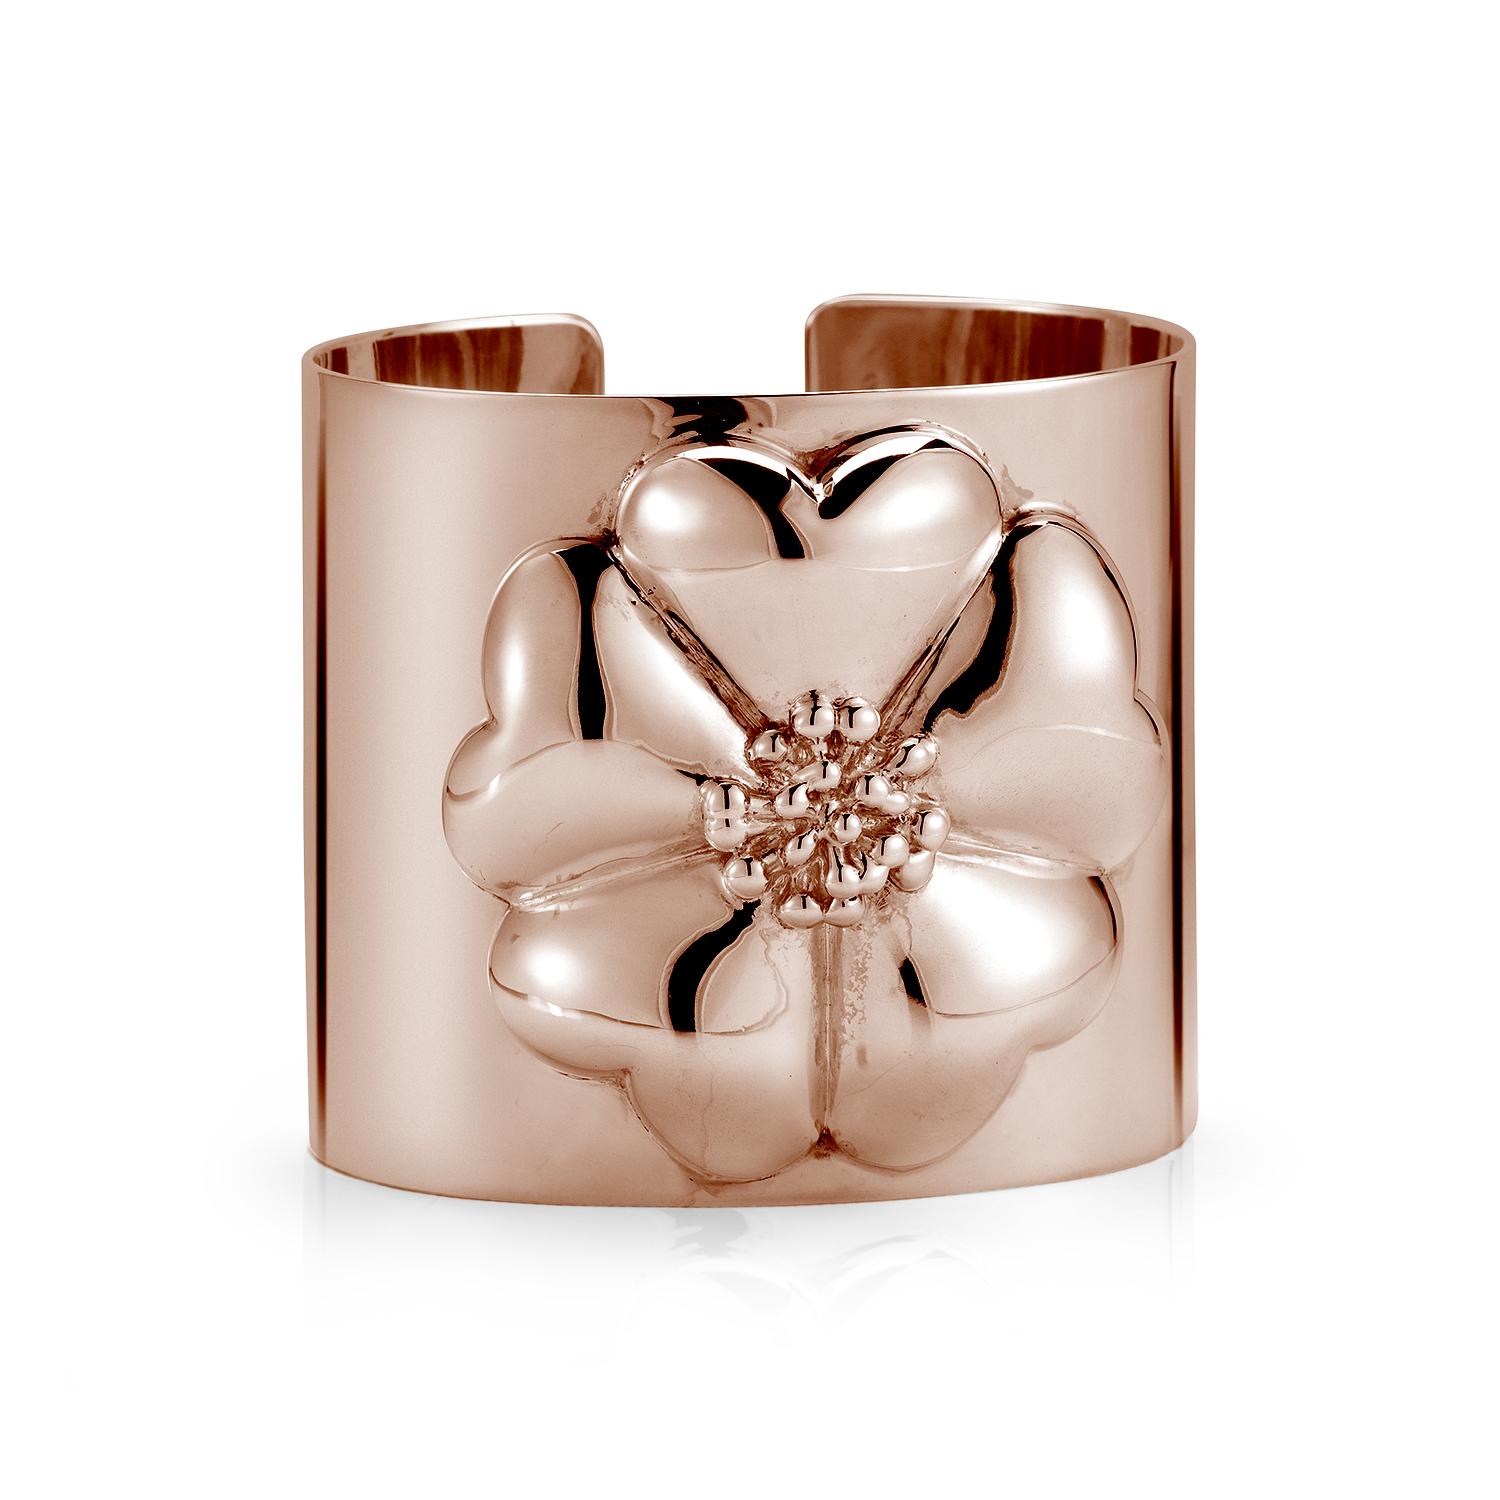 Designed in NYC

.925 Sterling Silver Blossom Large Cuff Bracelet.No matter the season, allow natural beauty to surround you wherever you go. Blossom large cuff bracelet: 

Sterling silver cuff and blossom also available in 24k gold vermeil and 24k